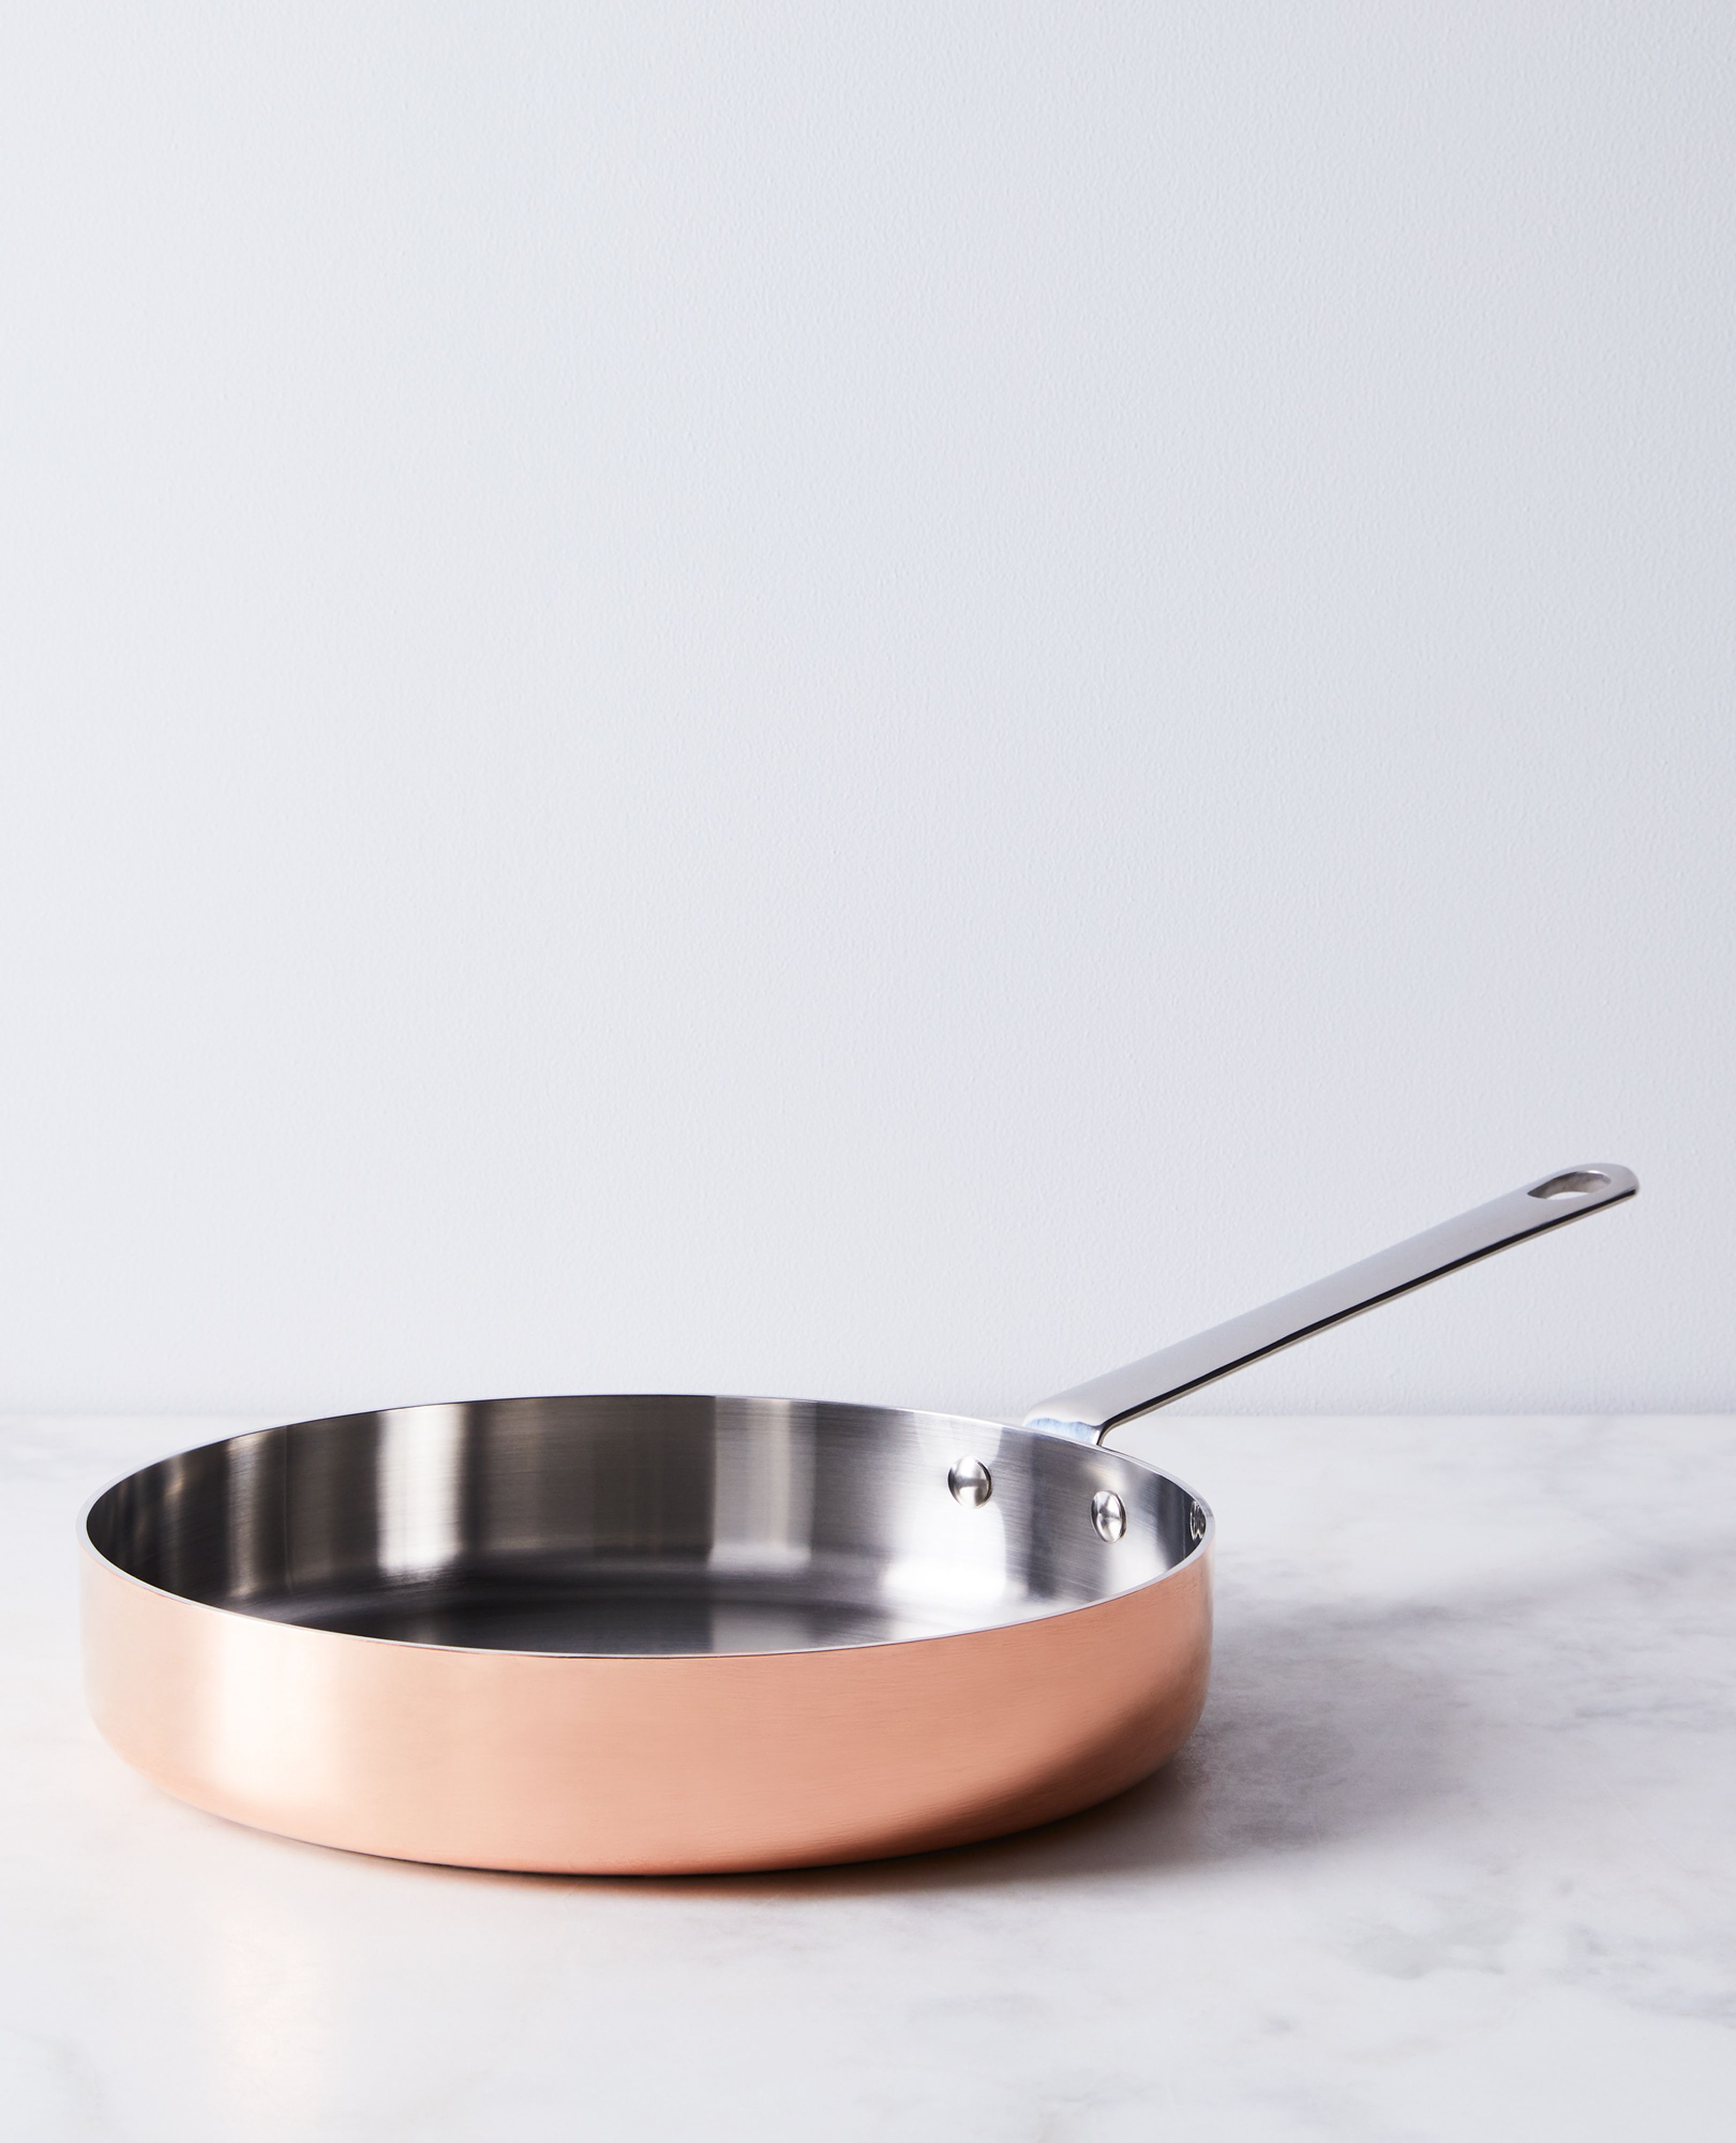 Scanpan Maitre D Copper Cookware Collection On Food52